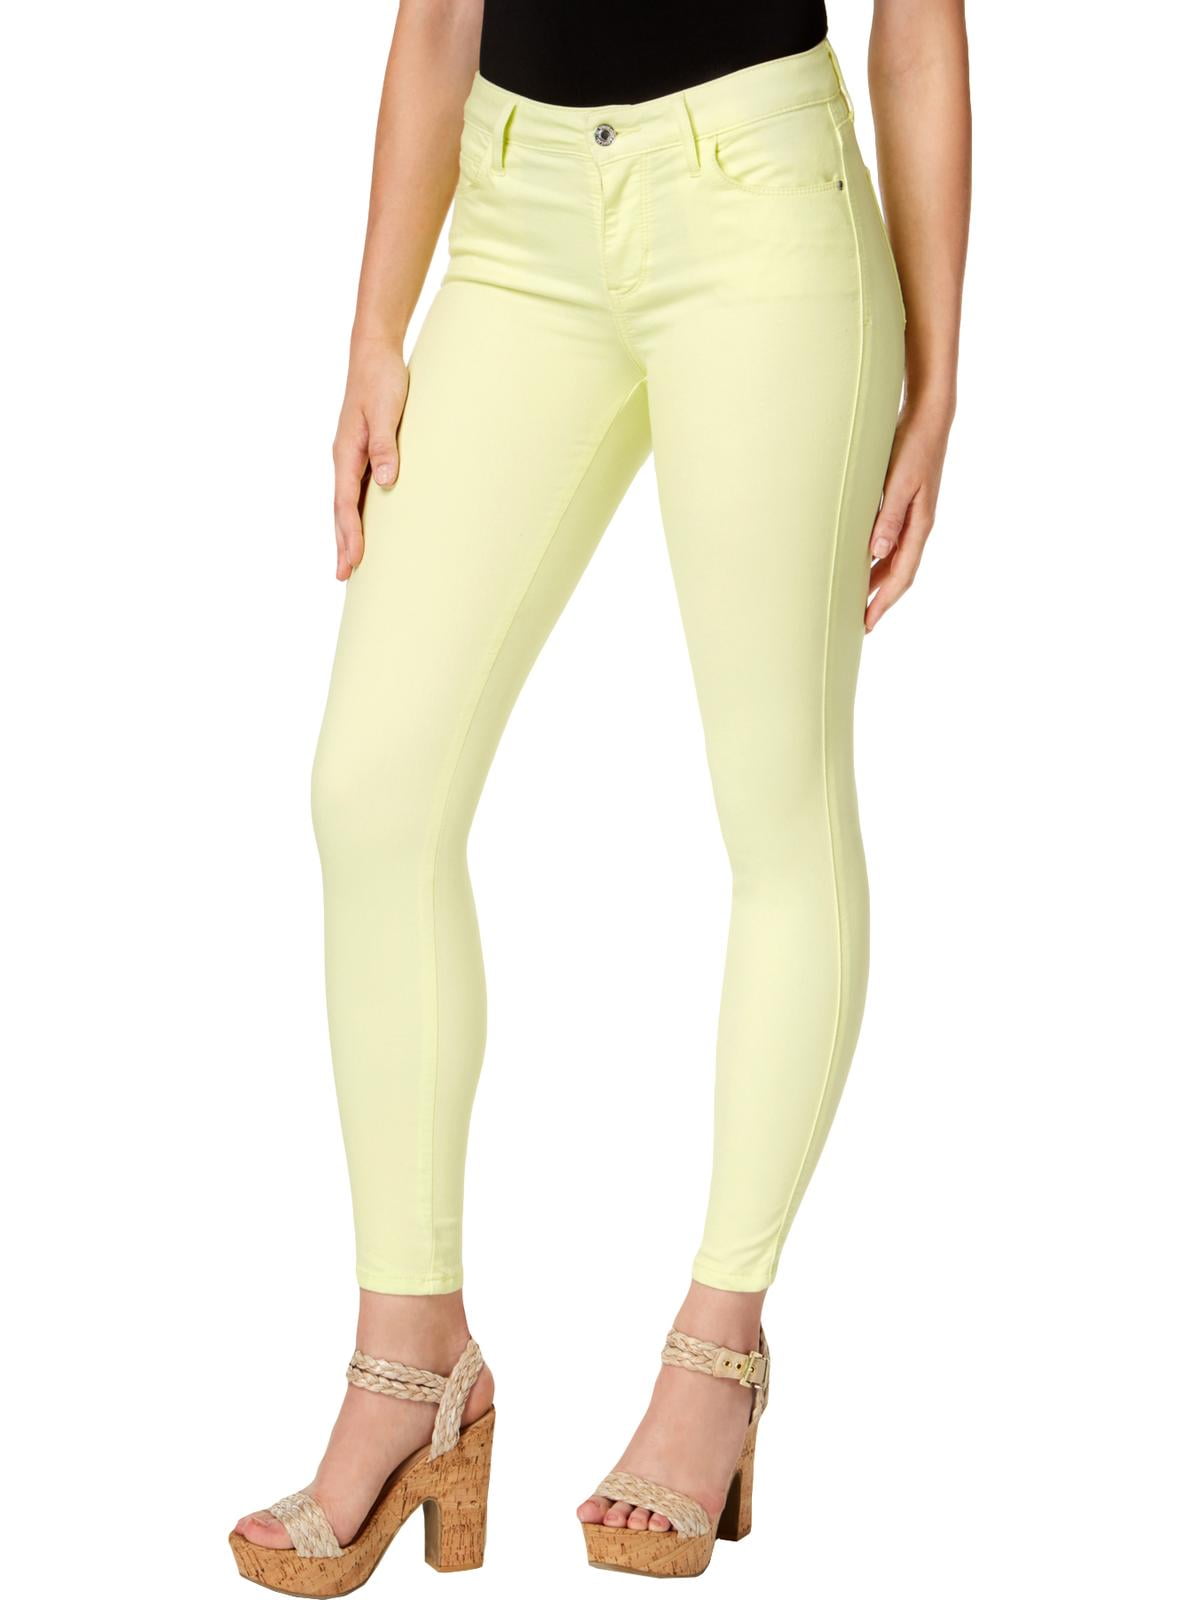 GUESS - Guess Womens Sexy Curve Denim Colored Colored Skinny Jeans ...